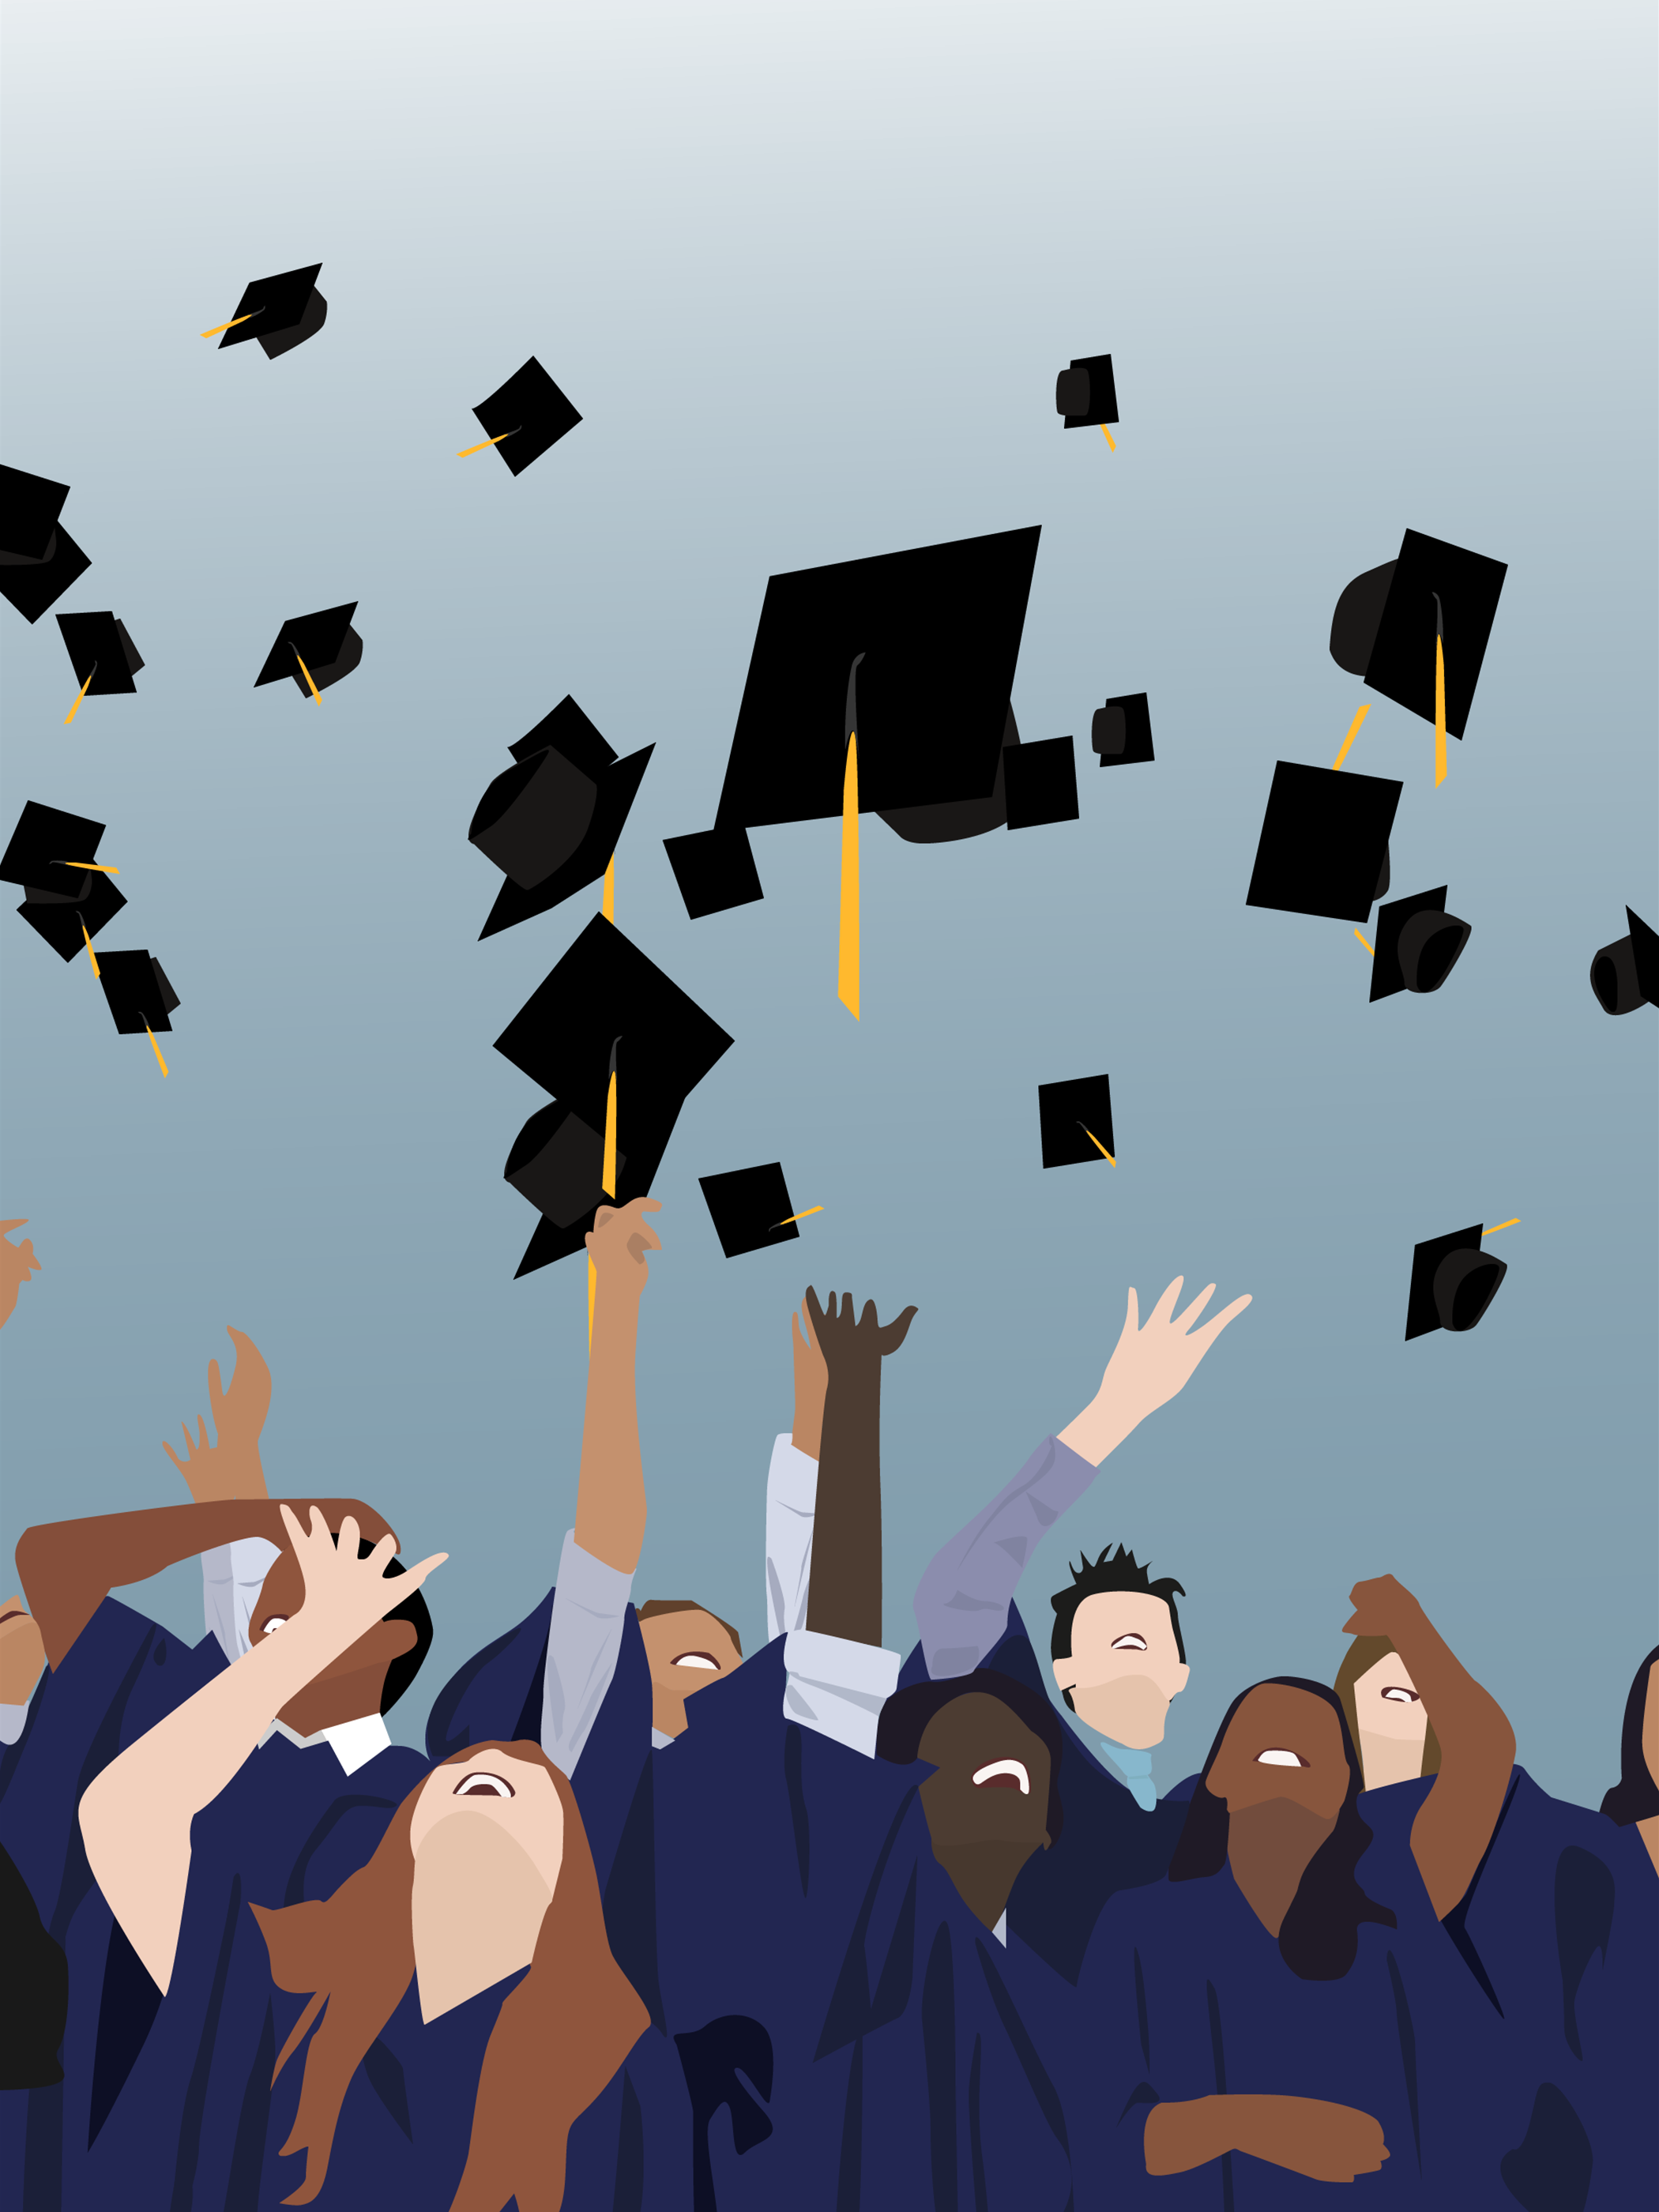 Illustration of a group of graduating students throwing their caps in the air